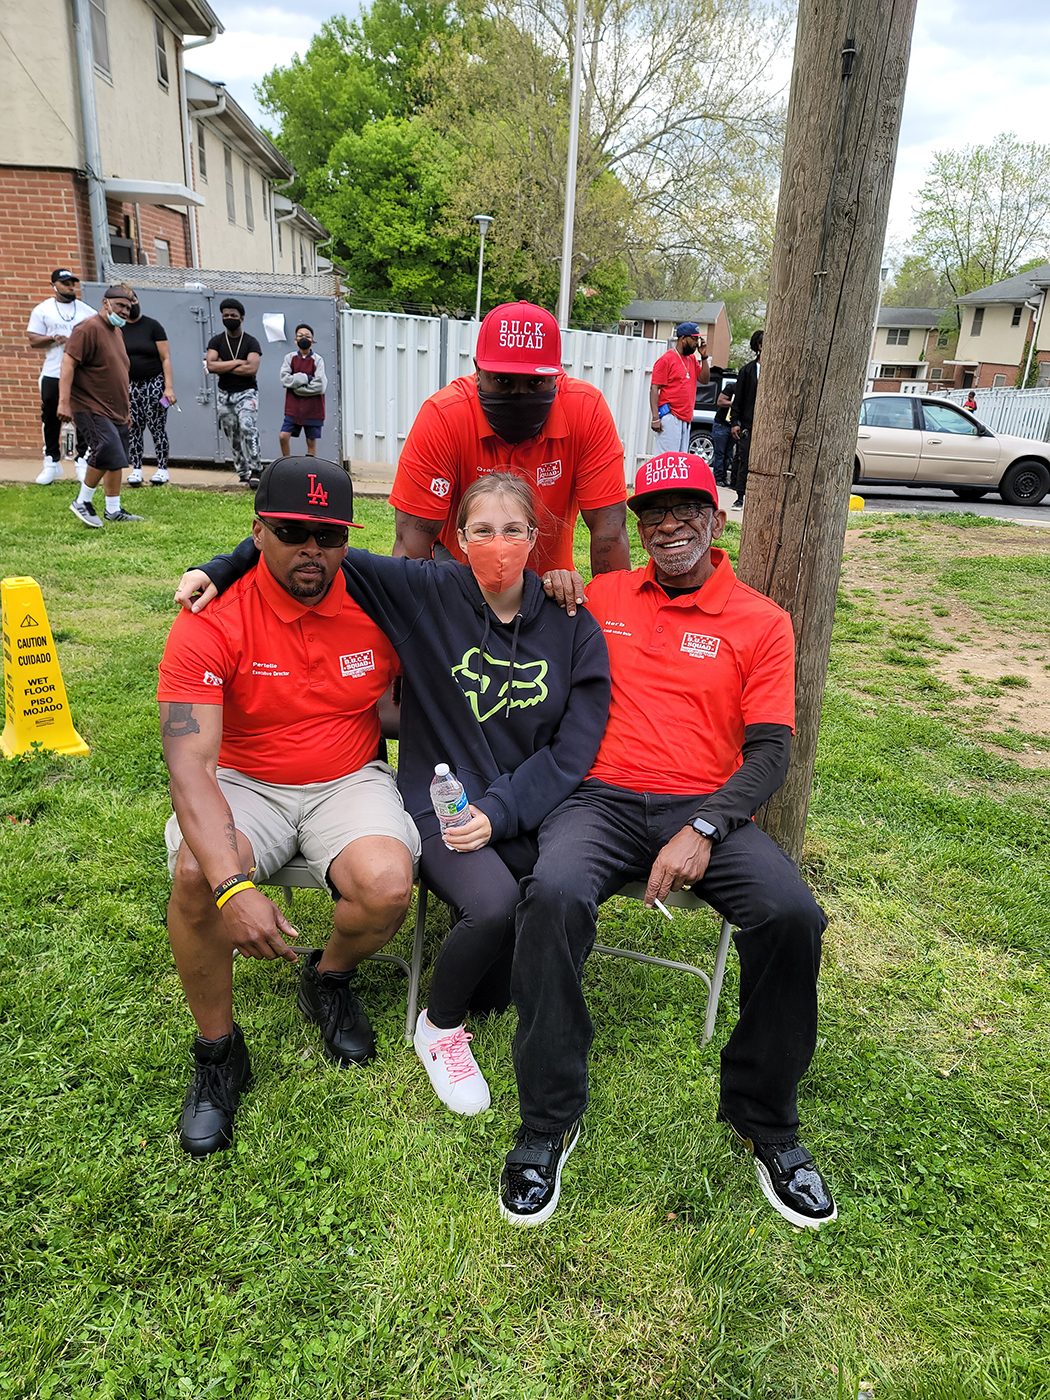 Three members of the BUCK squad sit with an event attendee during a community day at Westhave public housing community